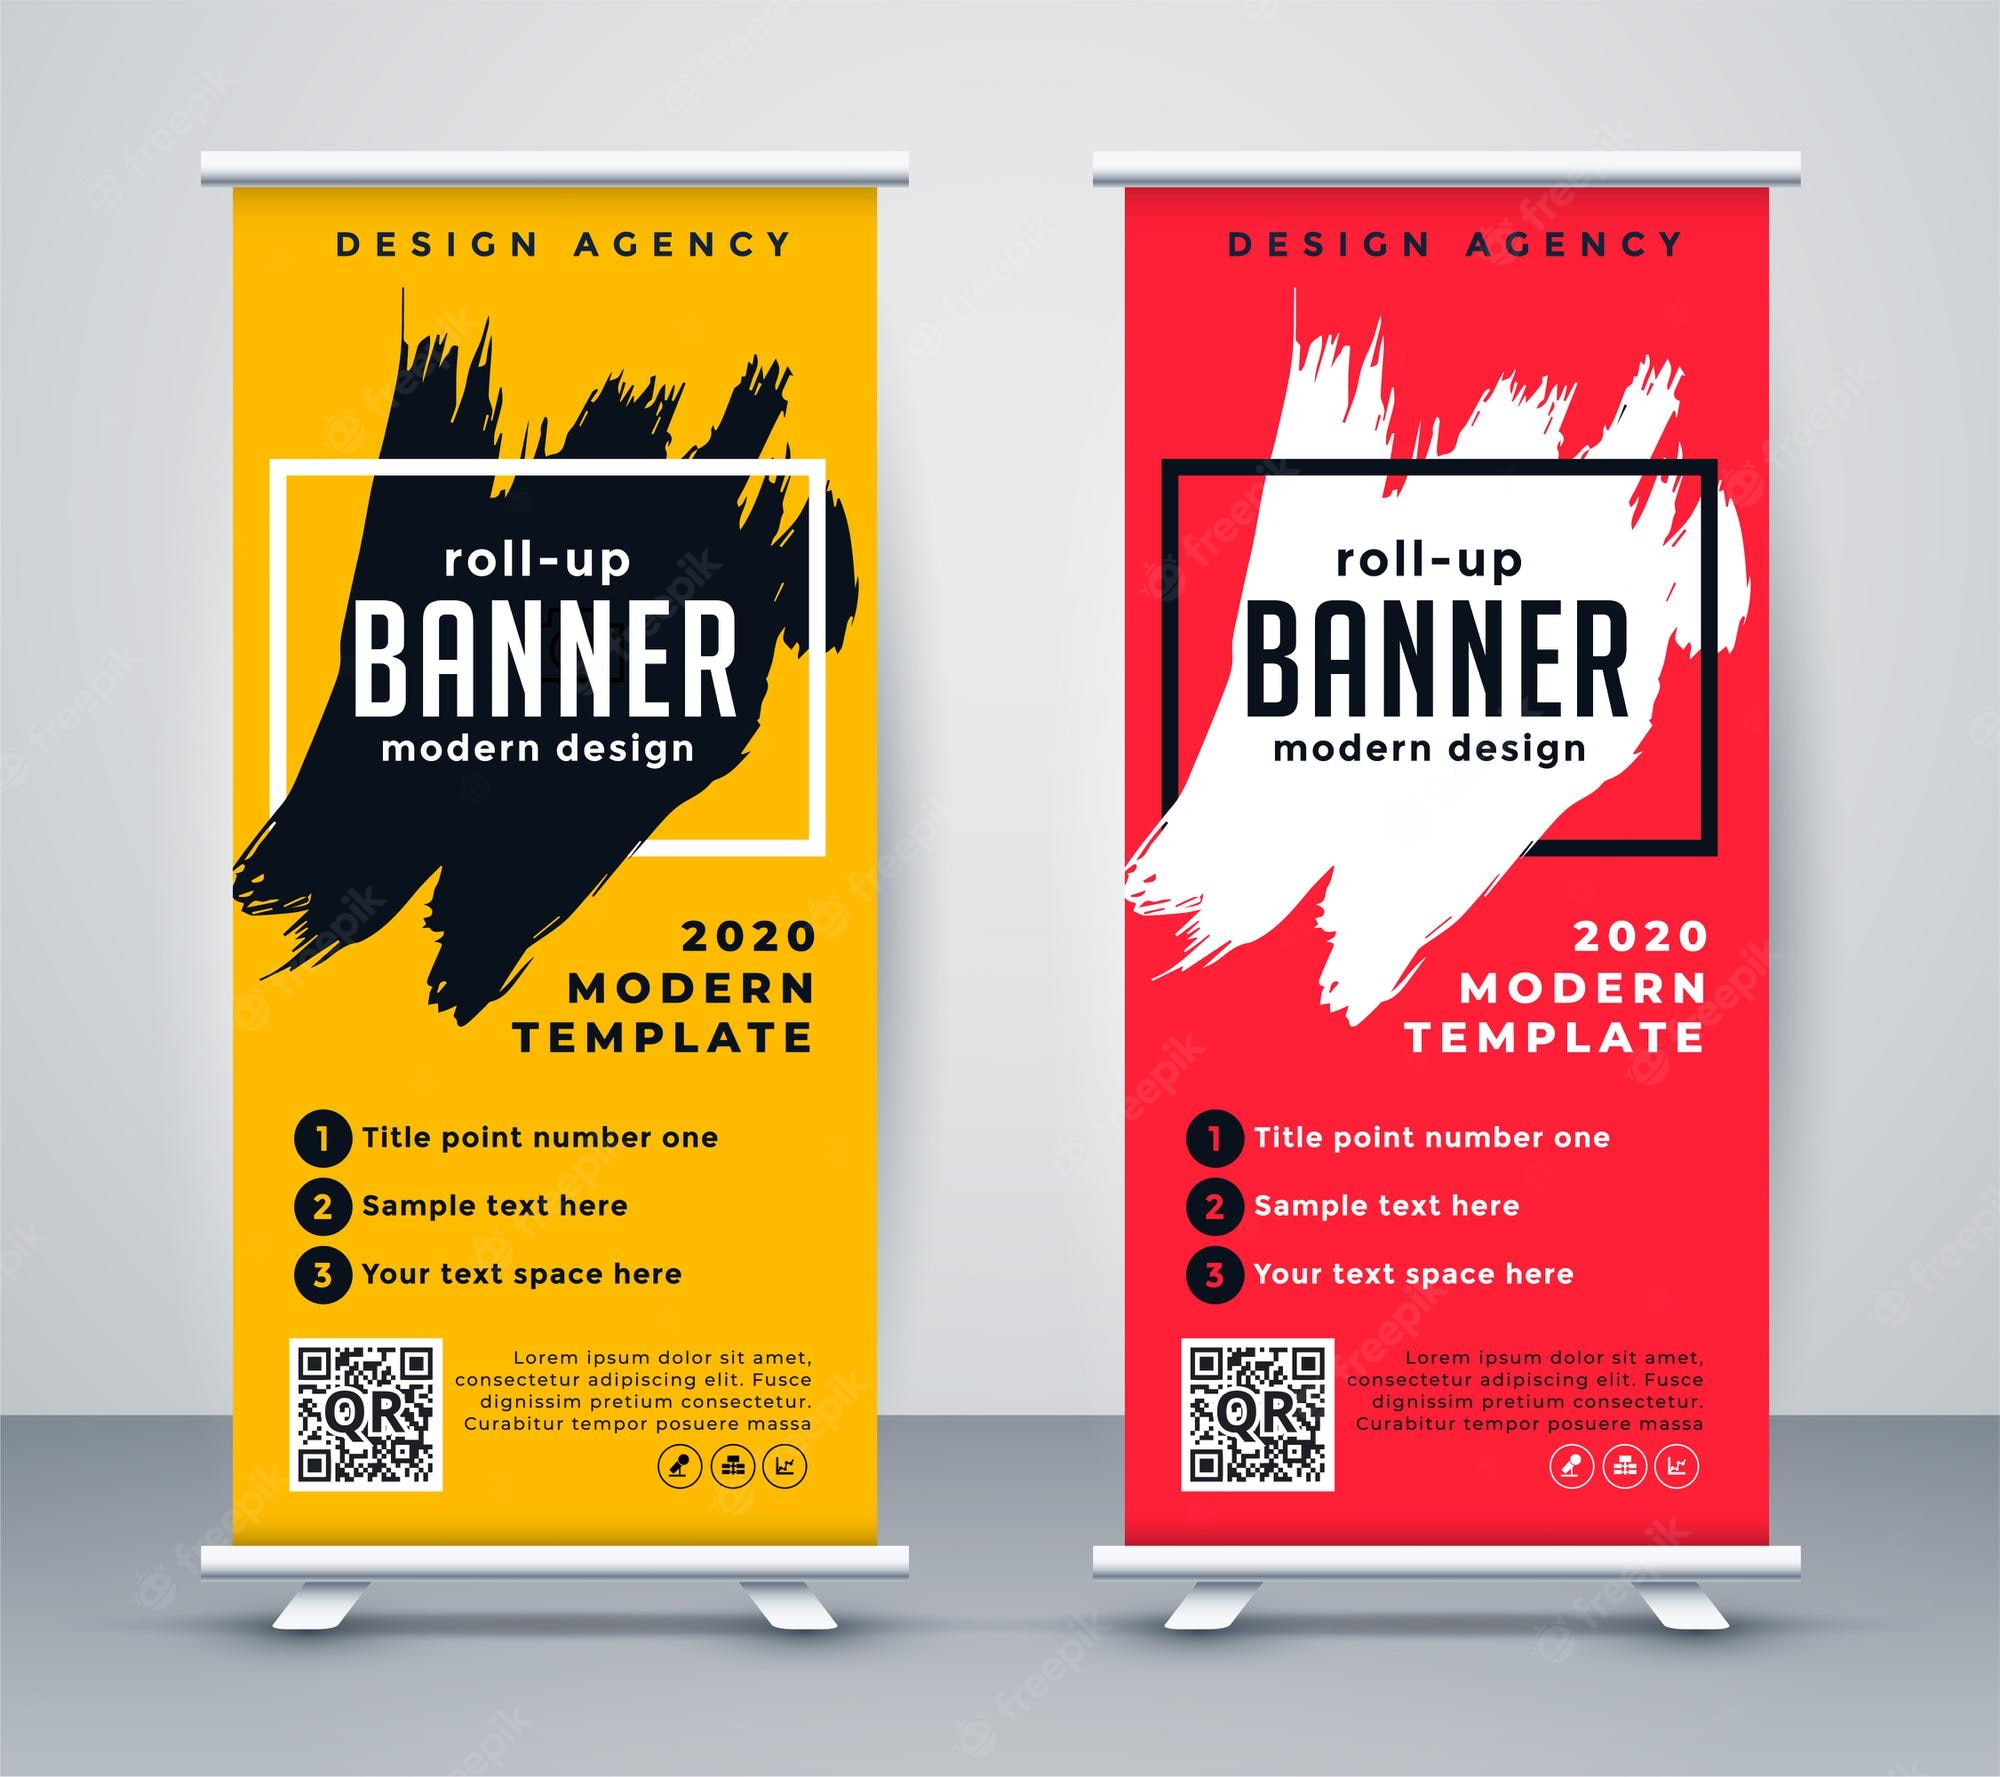 Standing banner Images  Free Vectors, Stock Photos & PSD Throughout Banner Stand Design Templates